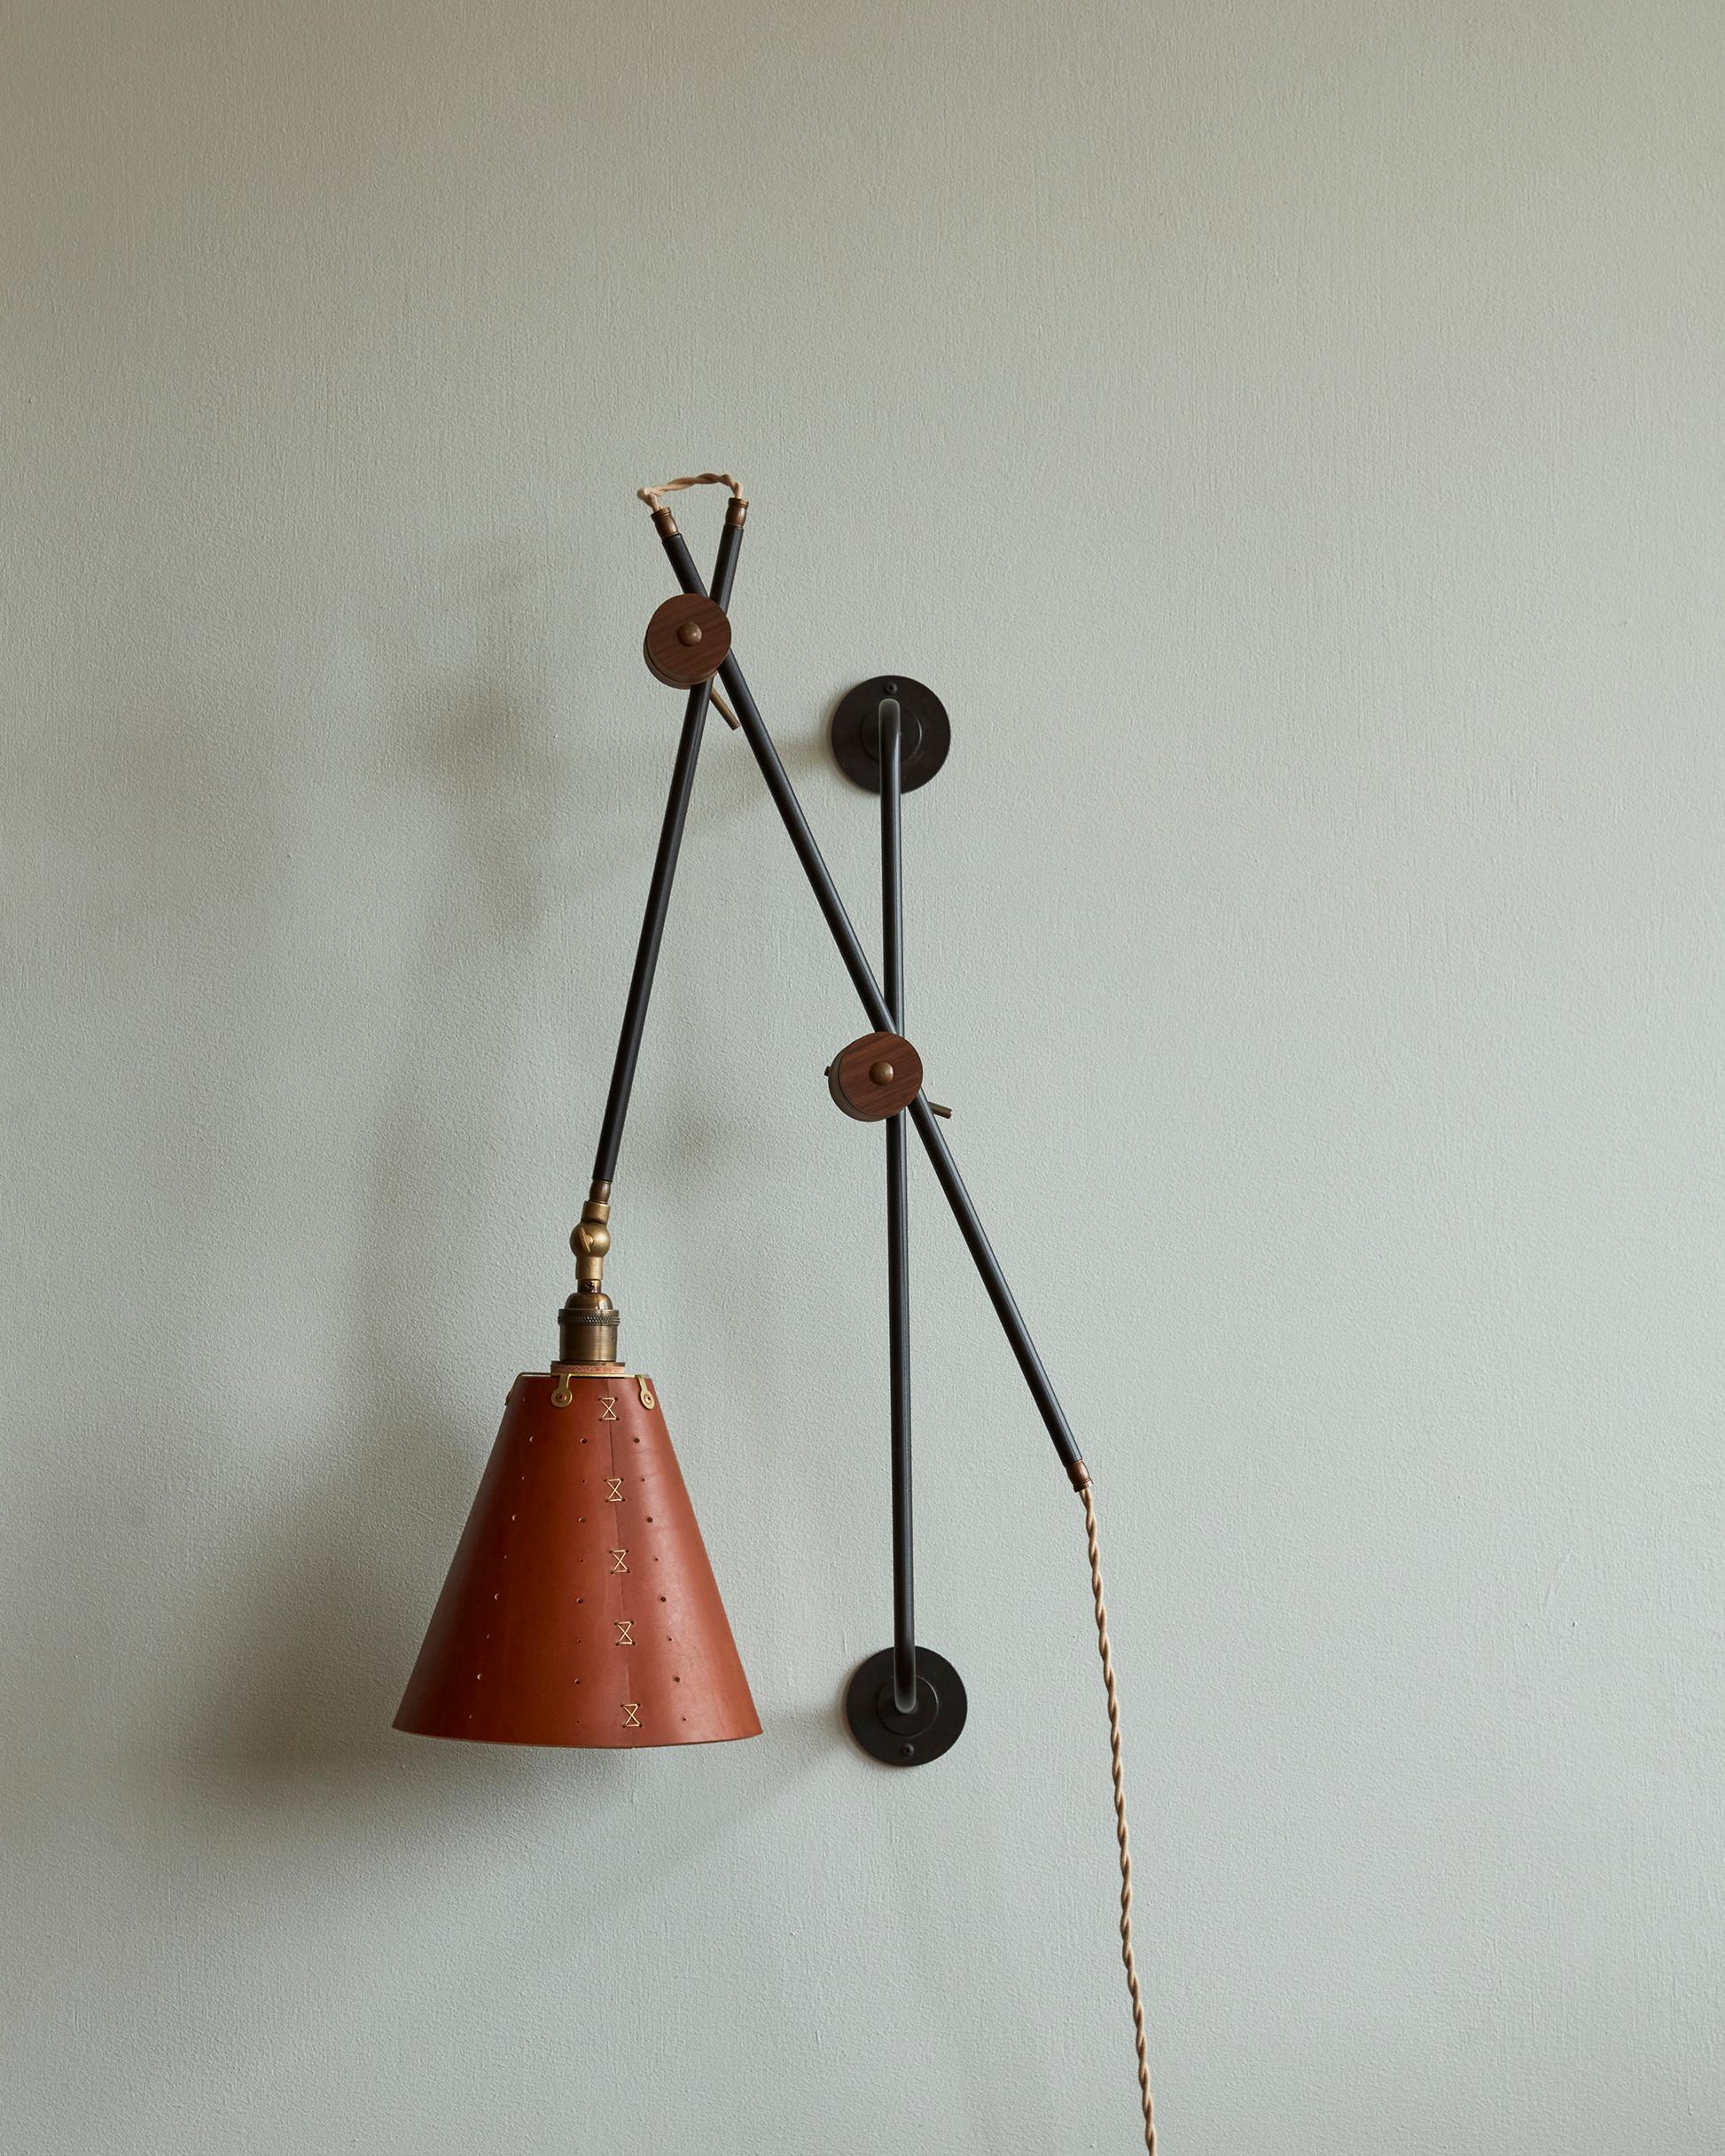 Modern Iron and Tan Leather Grace Articulating Wall Sconce - Plug In In New Condition For Sale In Philadelphia, PA